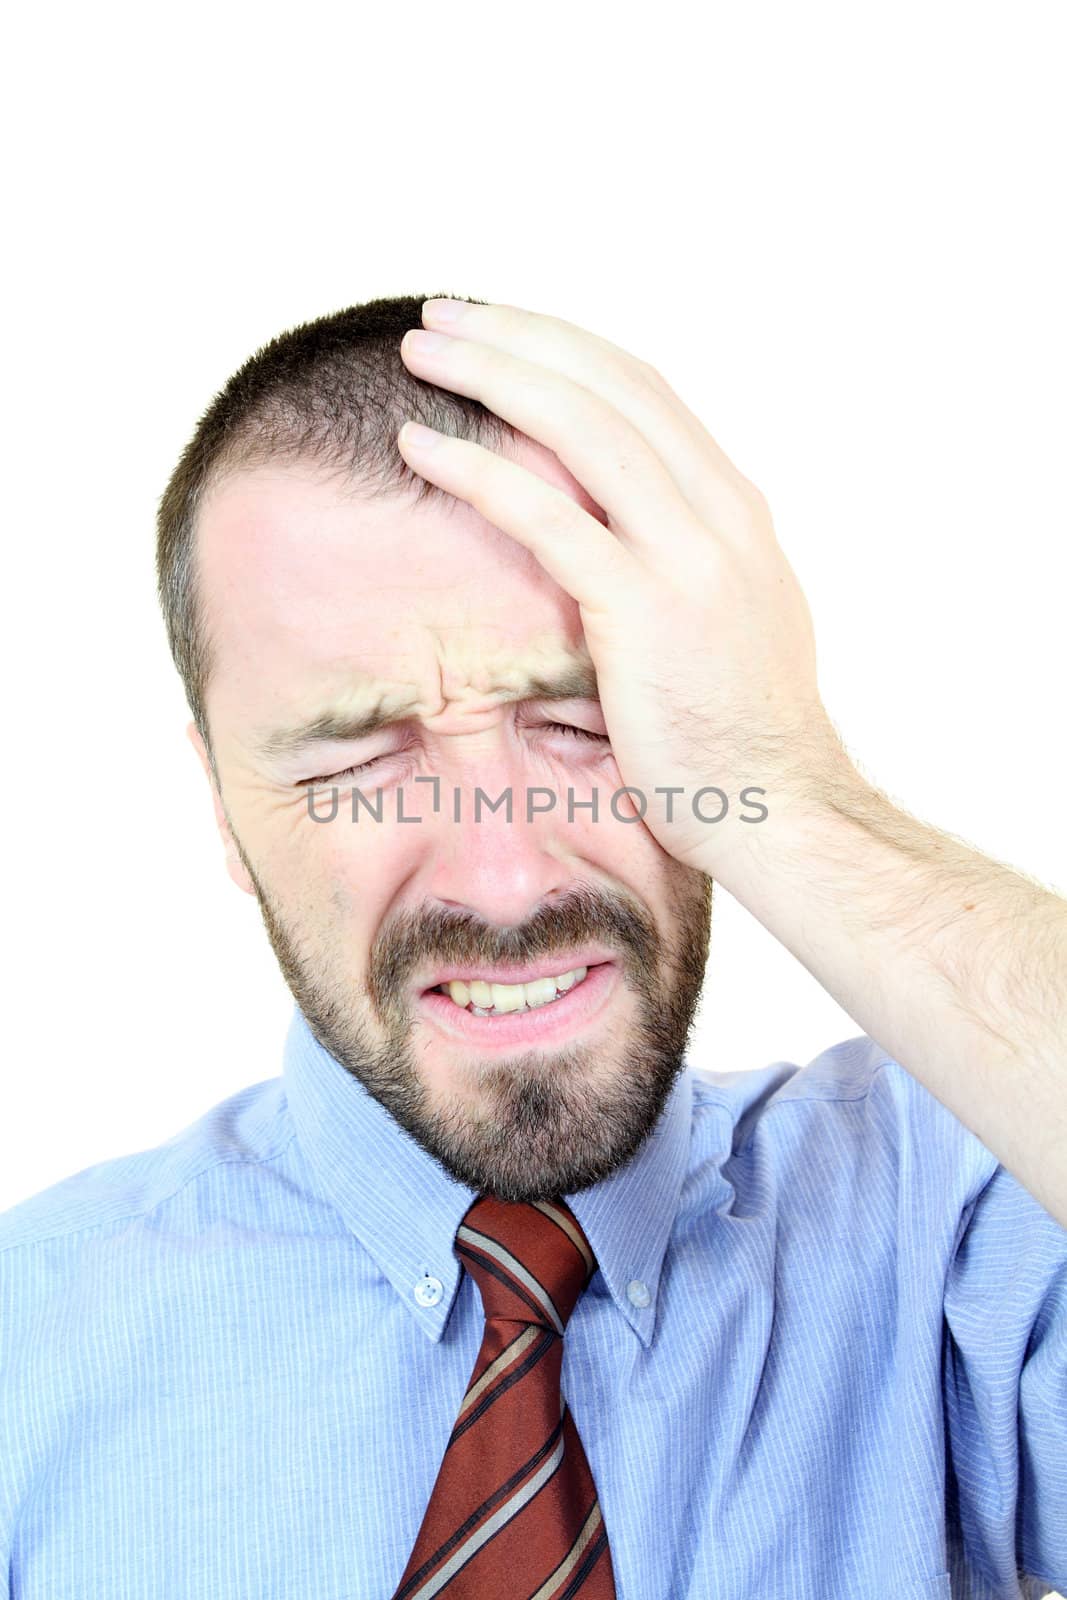 Strong headache - businessman in pain. Young adult near his 30s - portrait isolated against white background. Short-haired male.